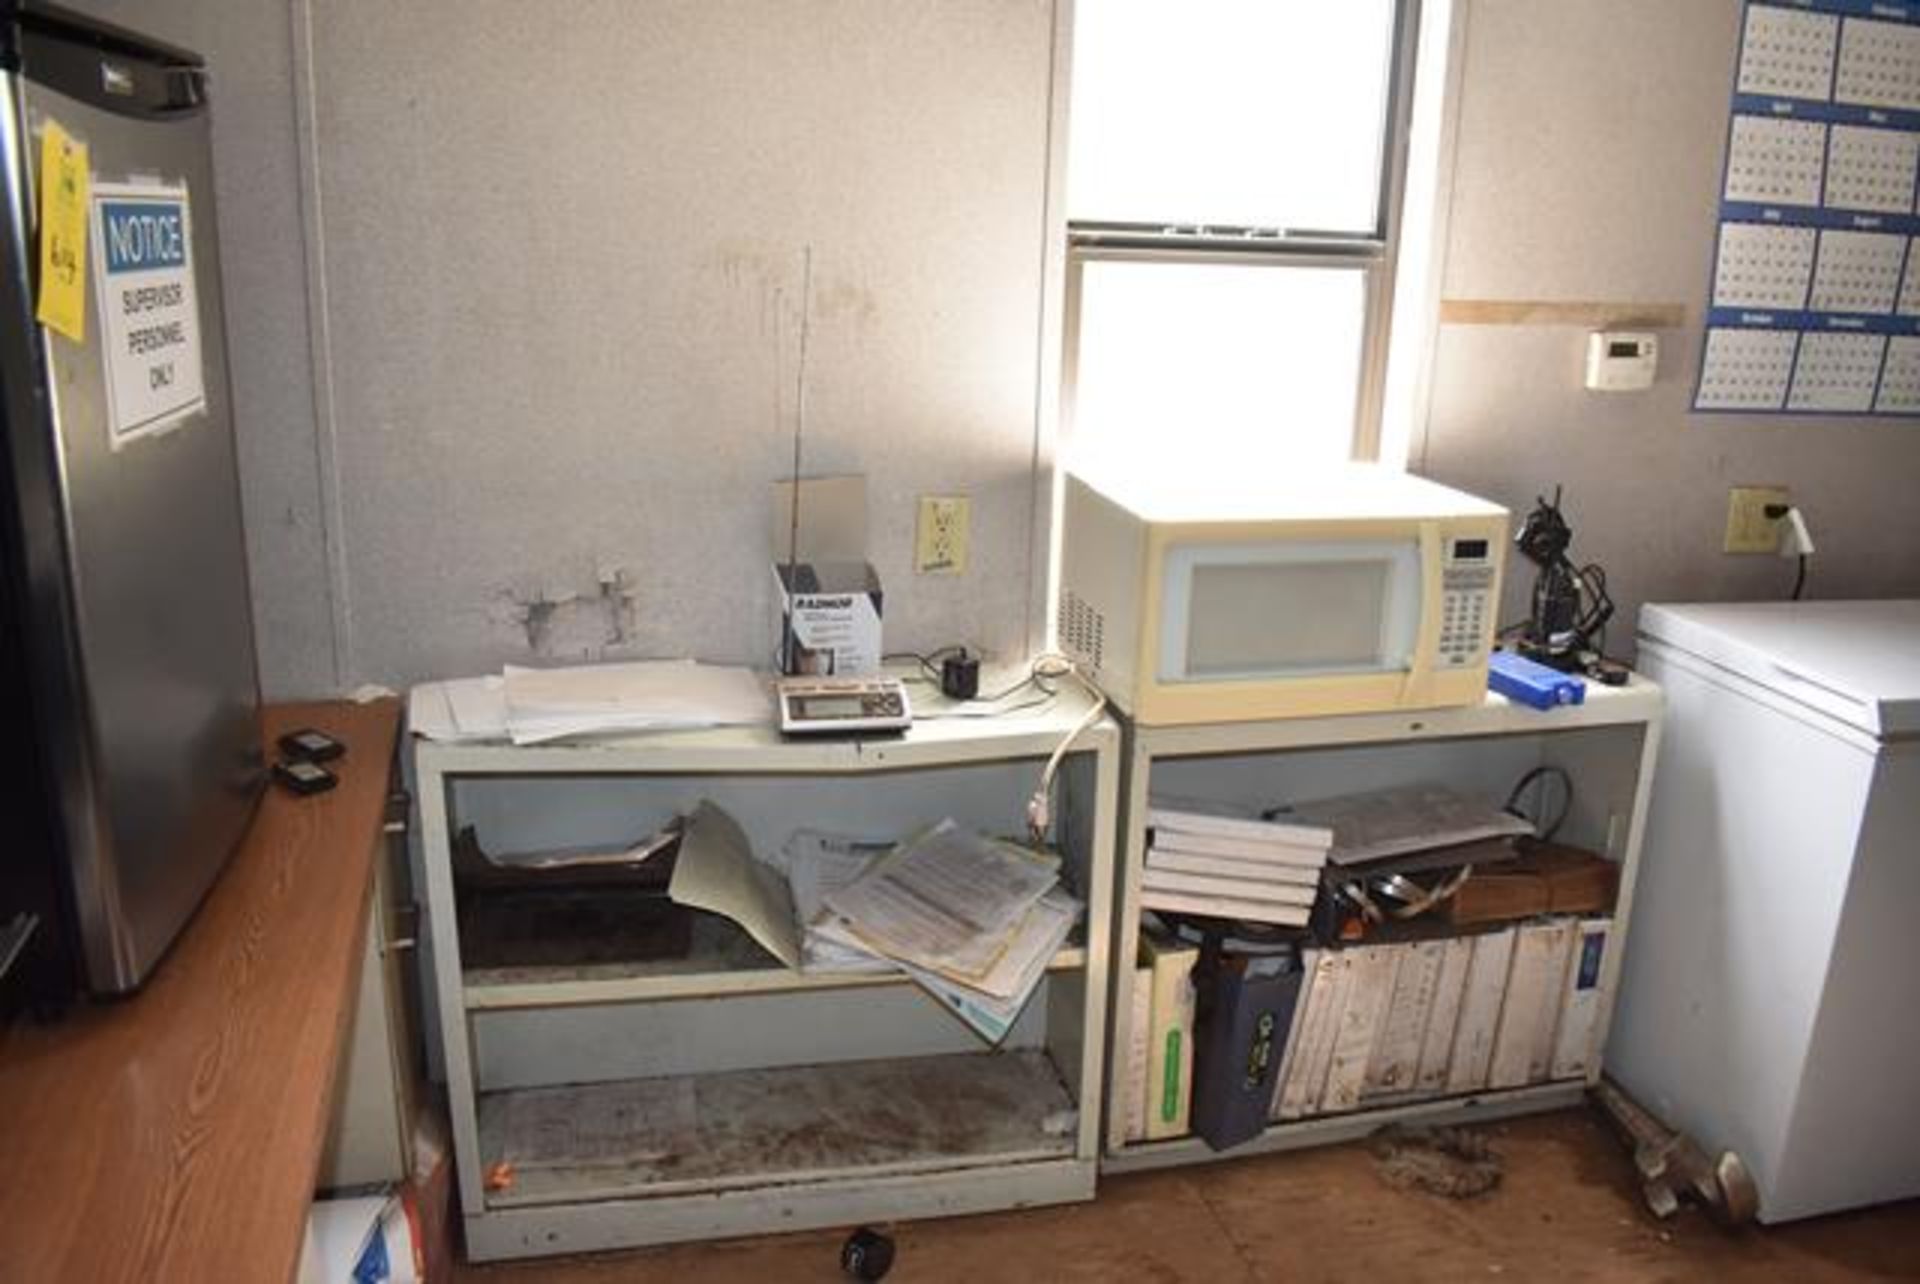 Office Contents - Desk, Microwave, File Cabinets - Image 3 of 3